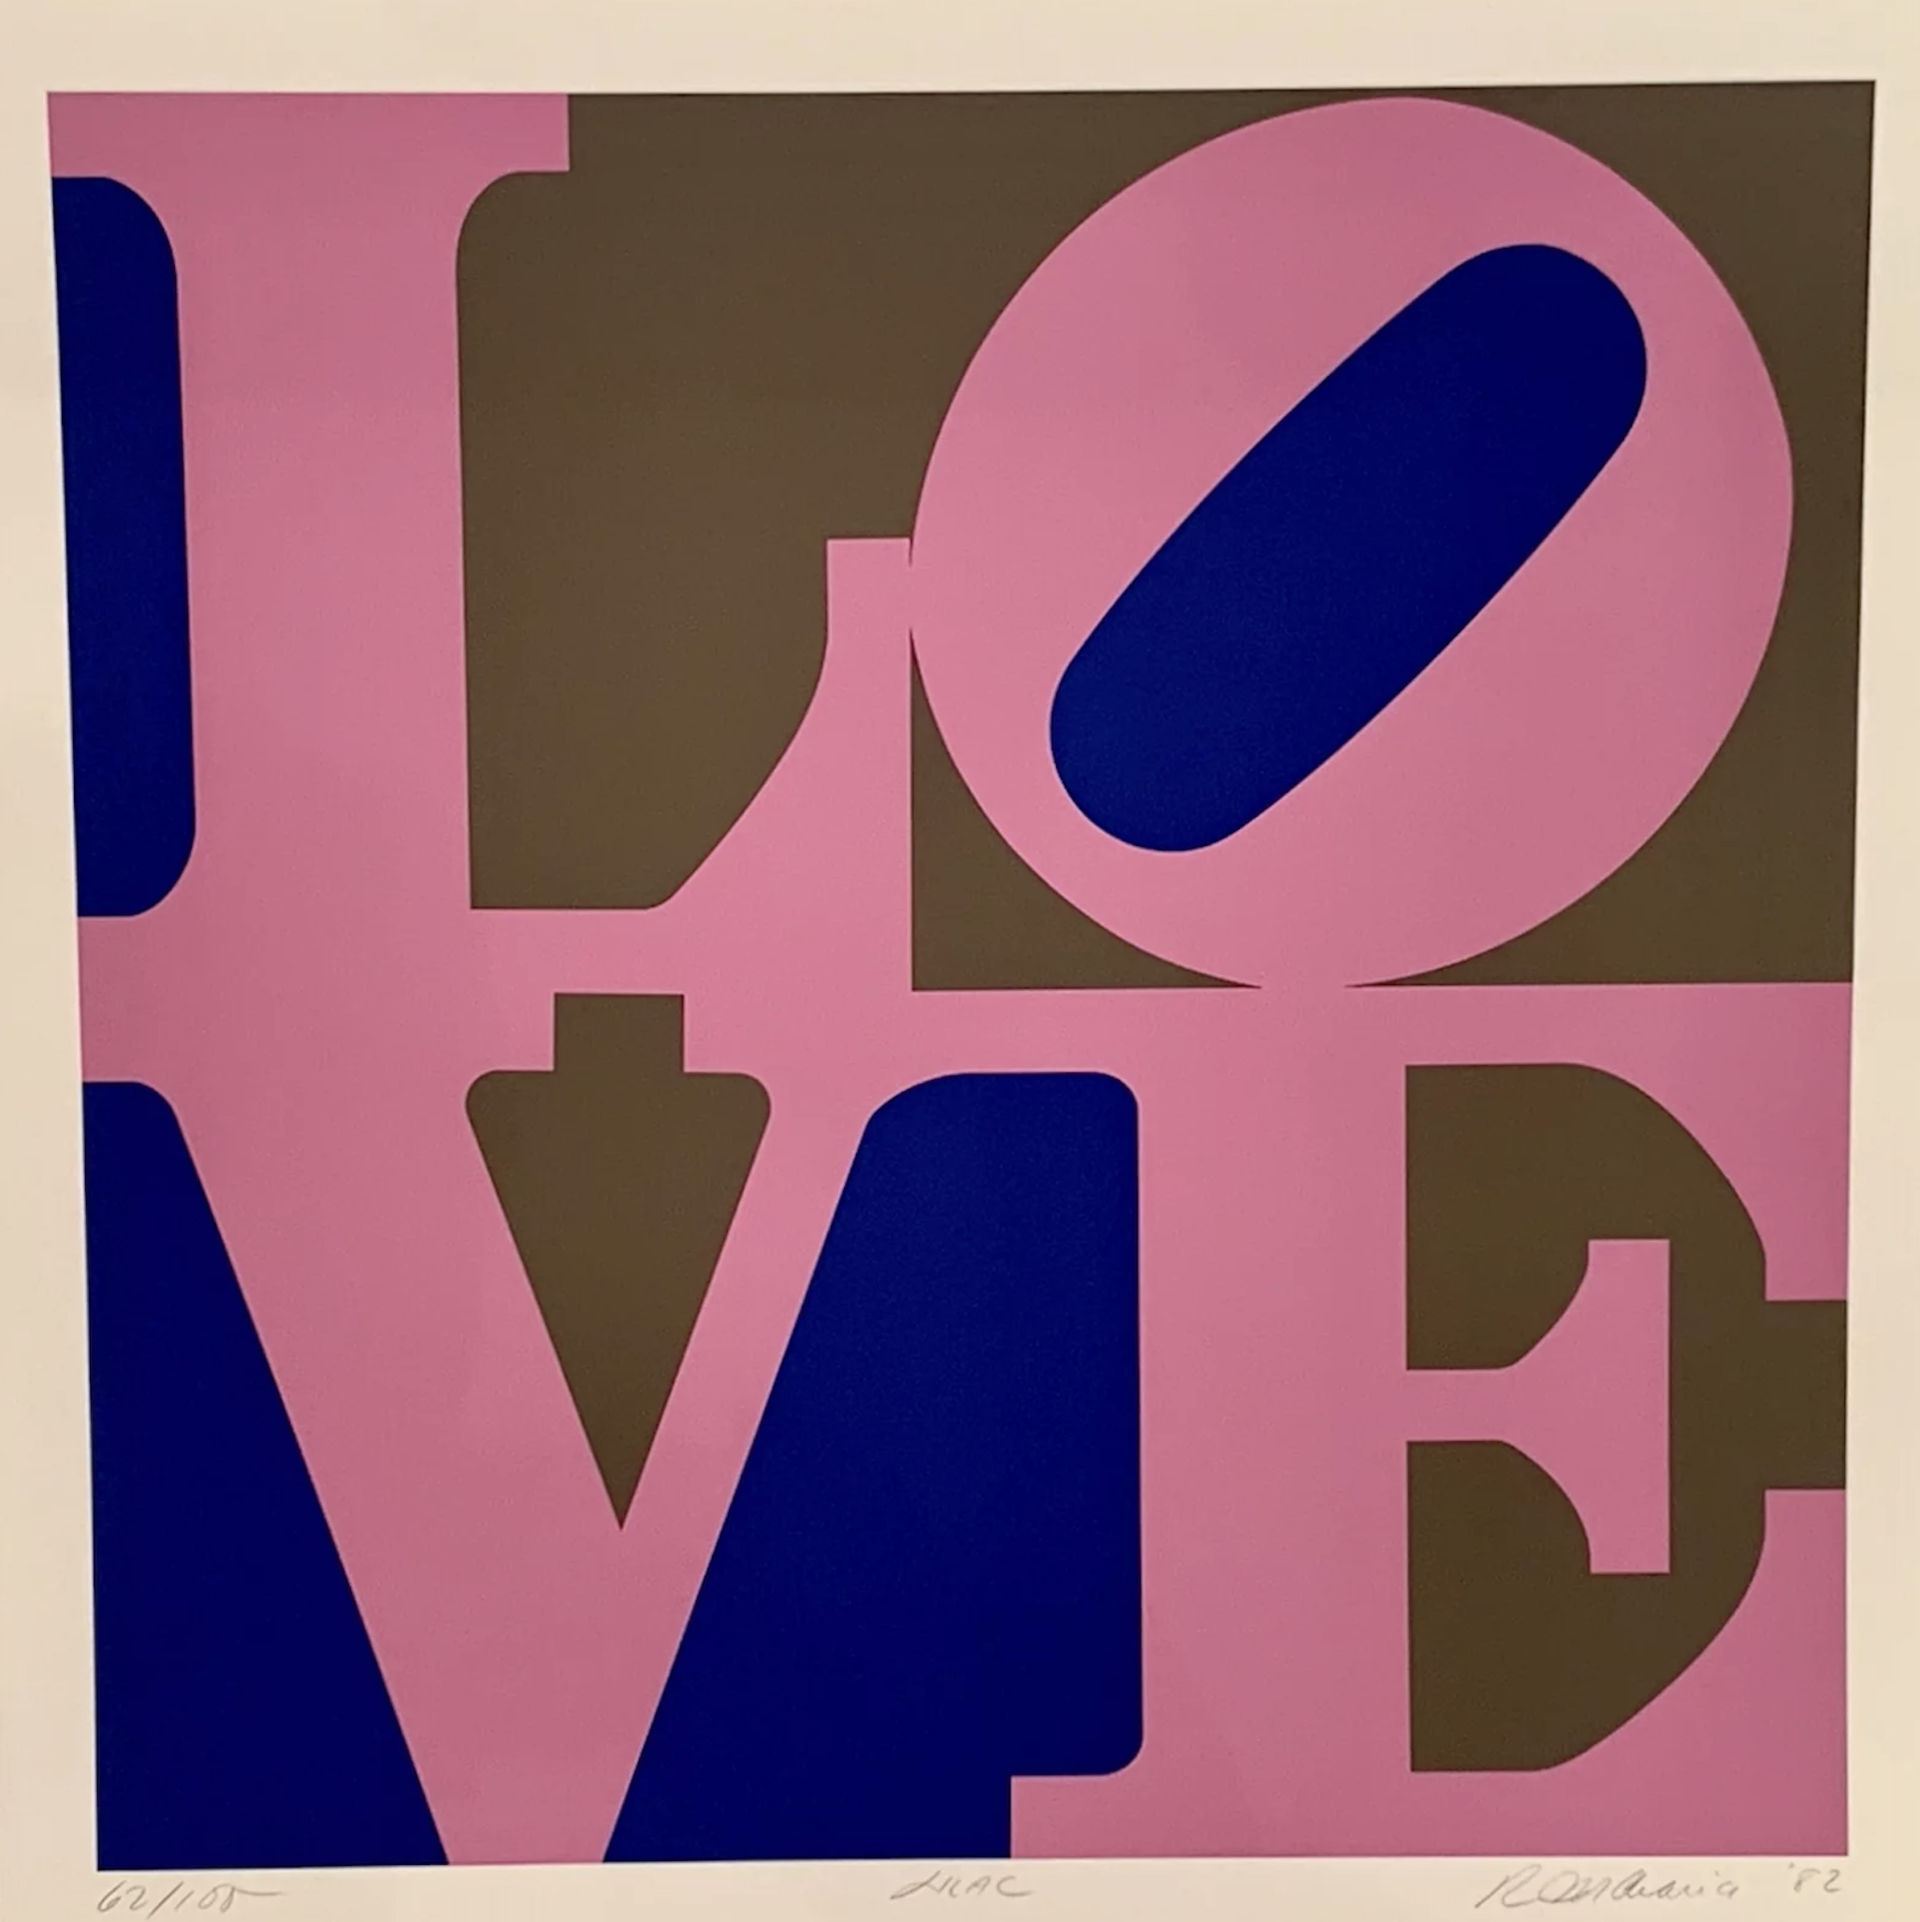 A Garden of Love: Lilac by Robert Indiana